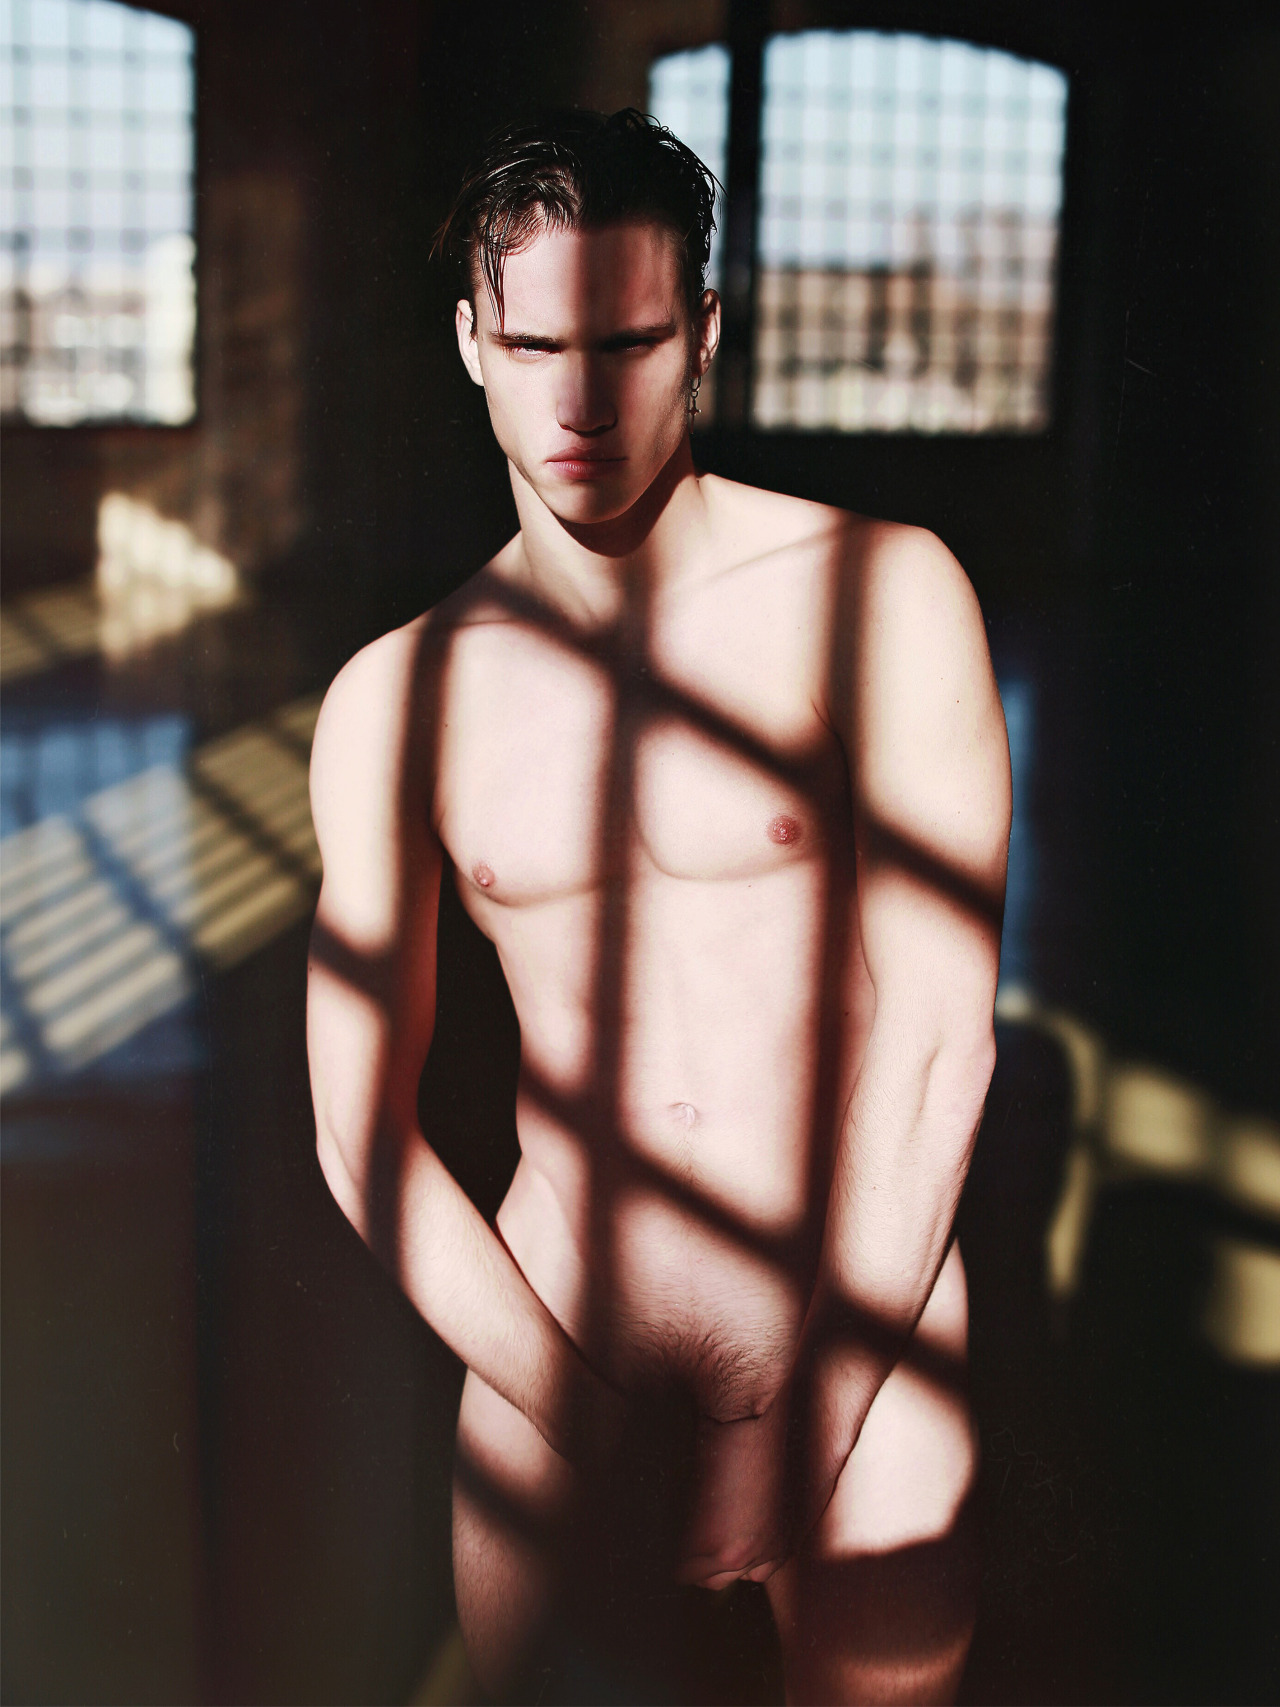 gonakedco:  boyswithoutbriefs:Shaded nude gonaked.co   men’s social nudity | est.